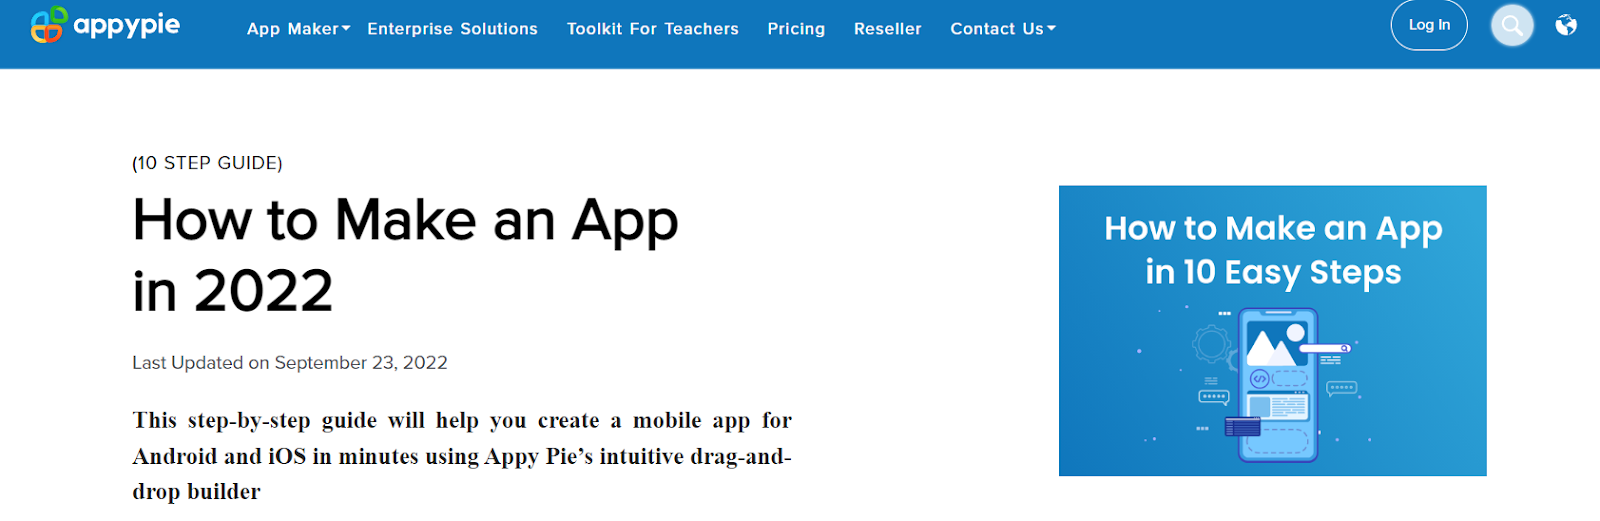 Appypie can let you make and sell apps easily. 